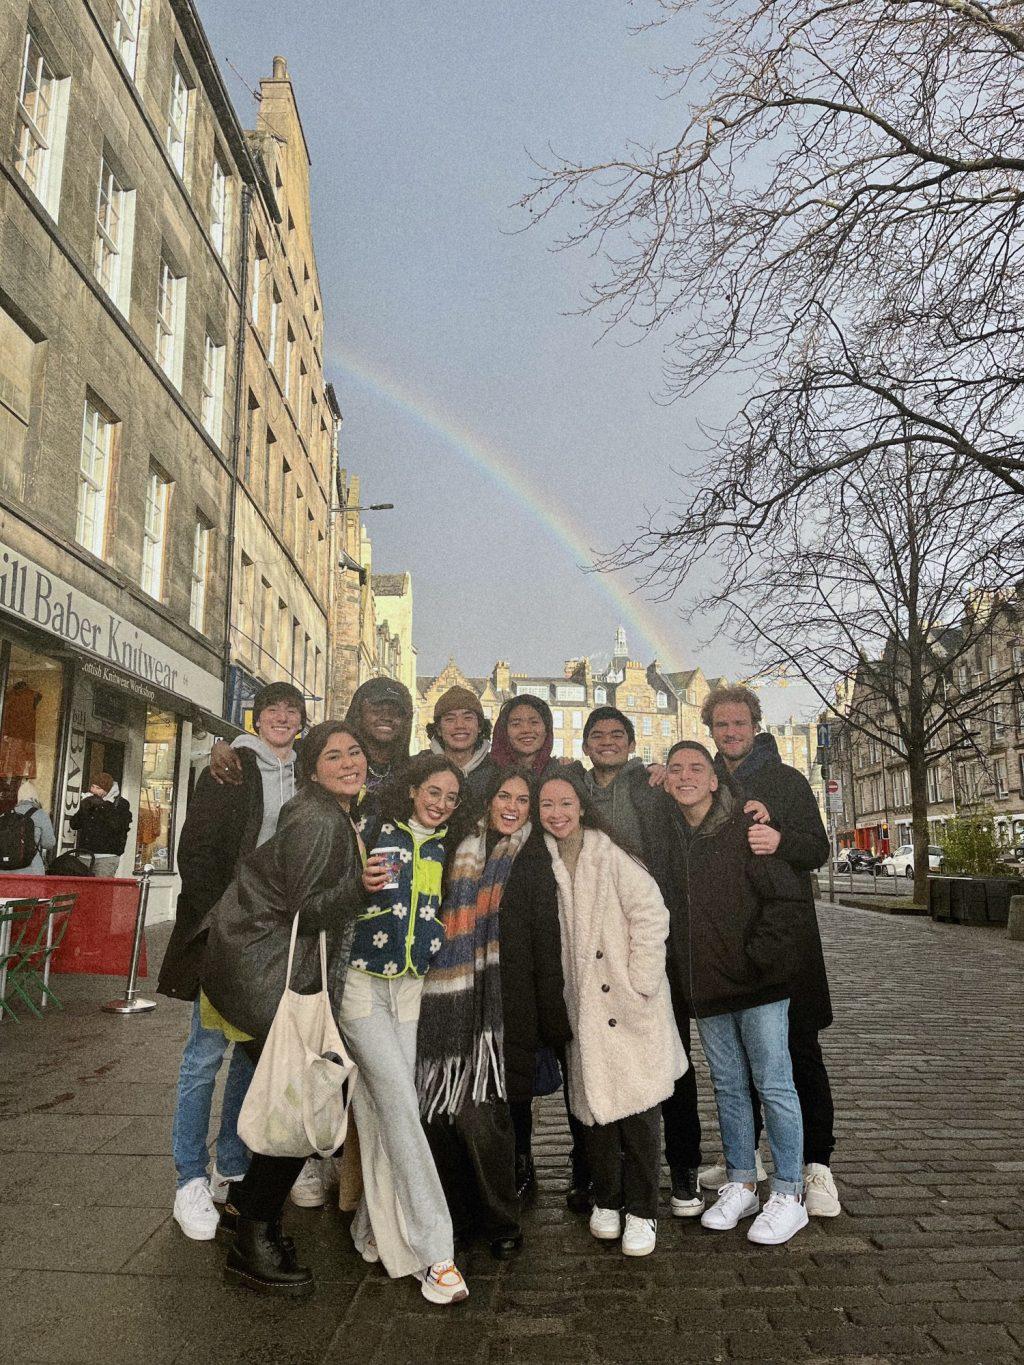 A group of Pepp London students pose in front of a rainbow in Edinburgh, Scotland in early February as part of a weekend trip. It snowed twice and for many like myself, it had been our first time seeing snowfall, we danced as the flakes hit our skin. Photo by Beth Gonzales